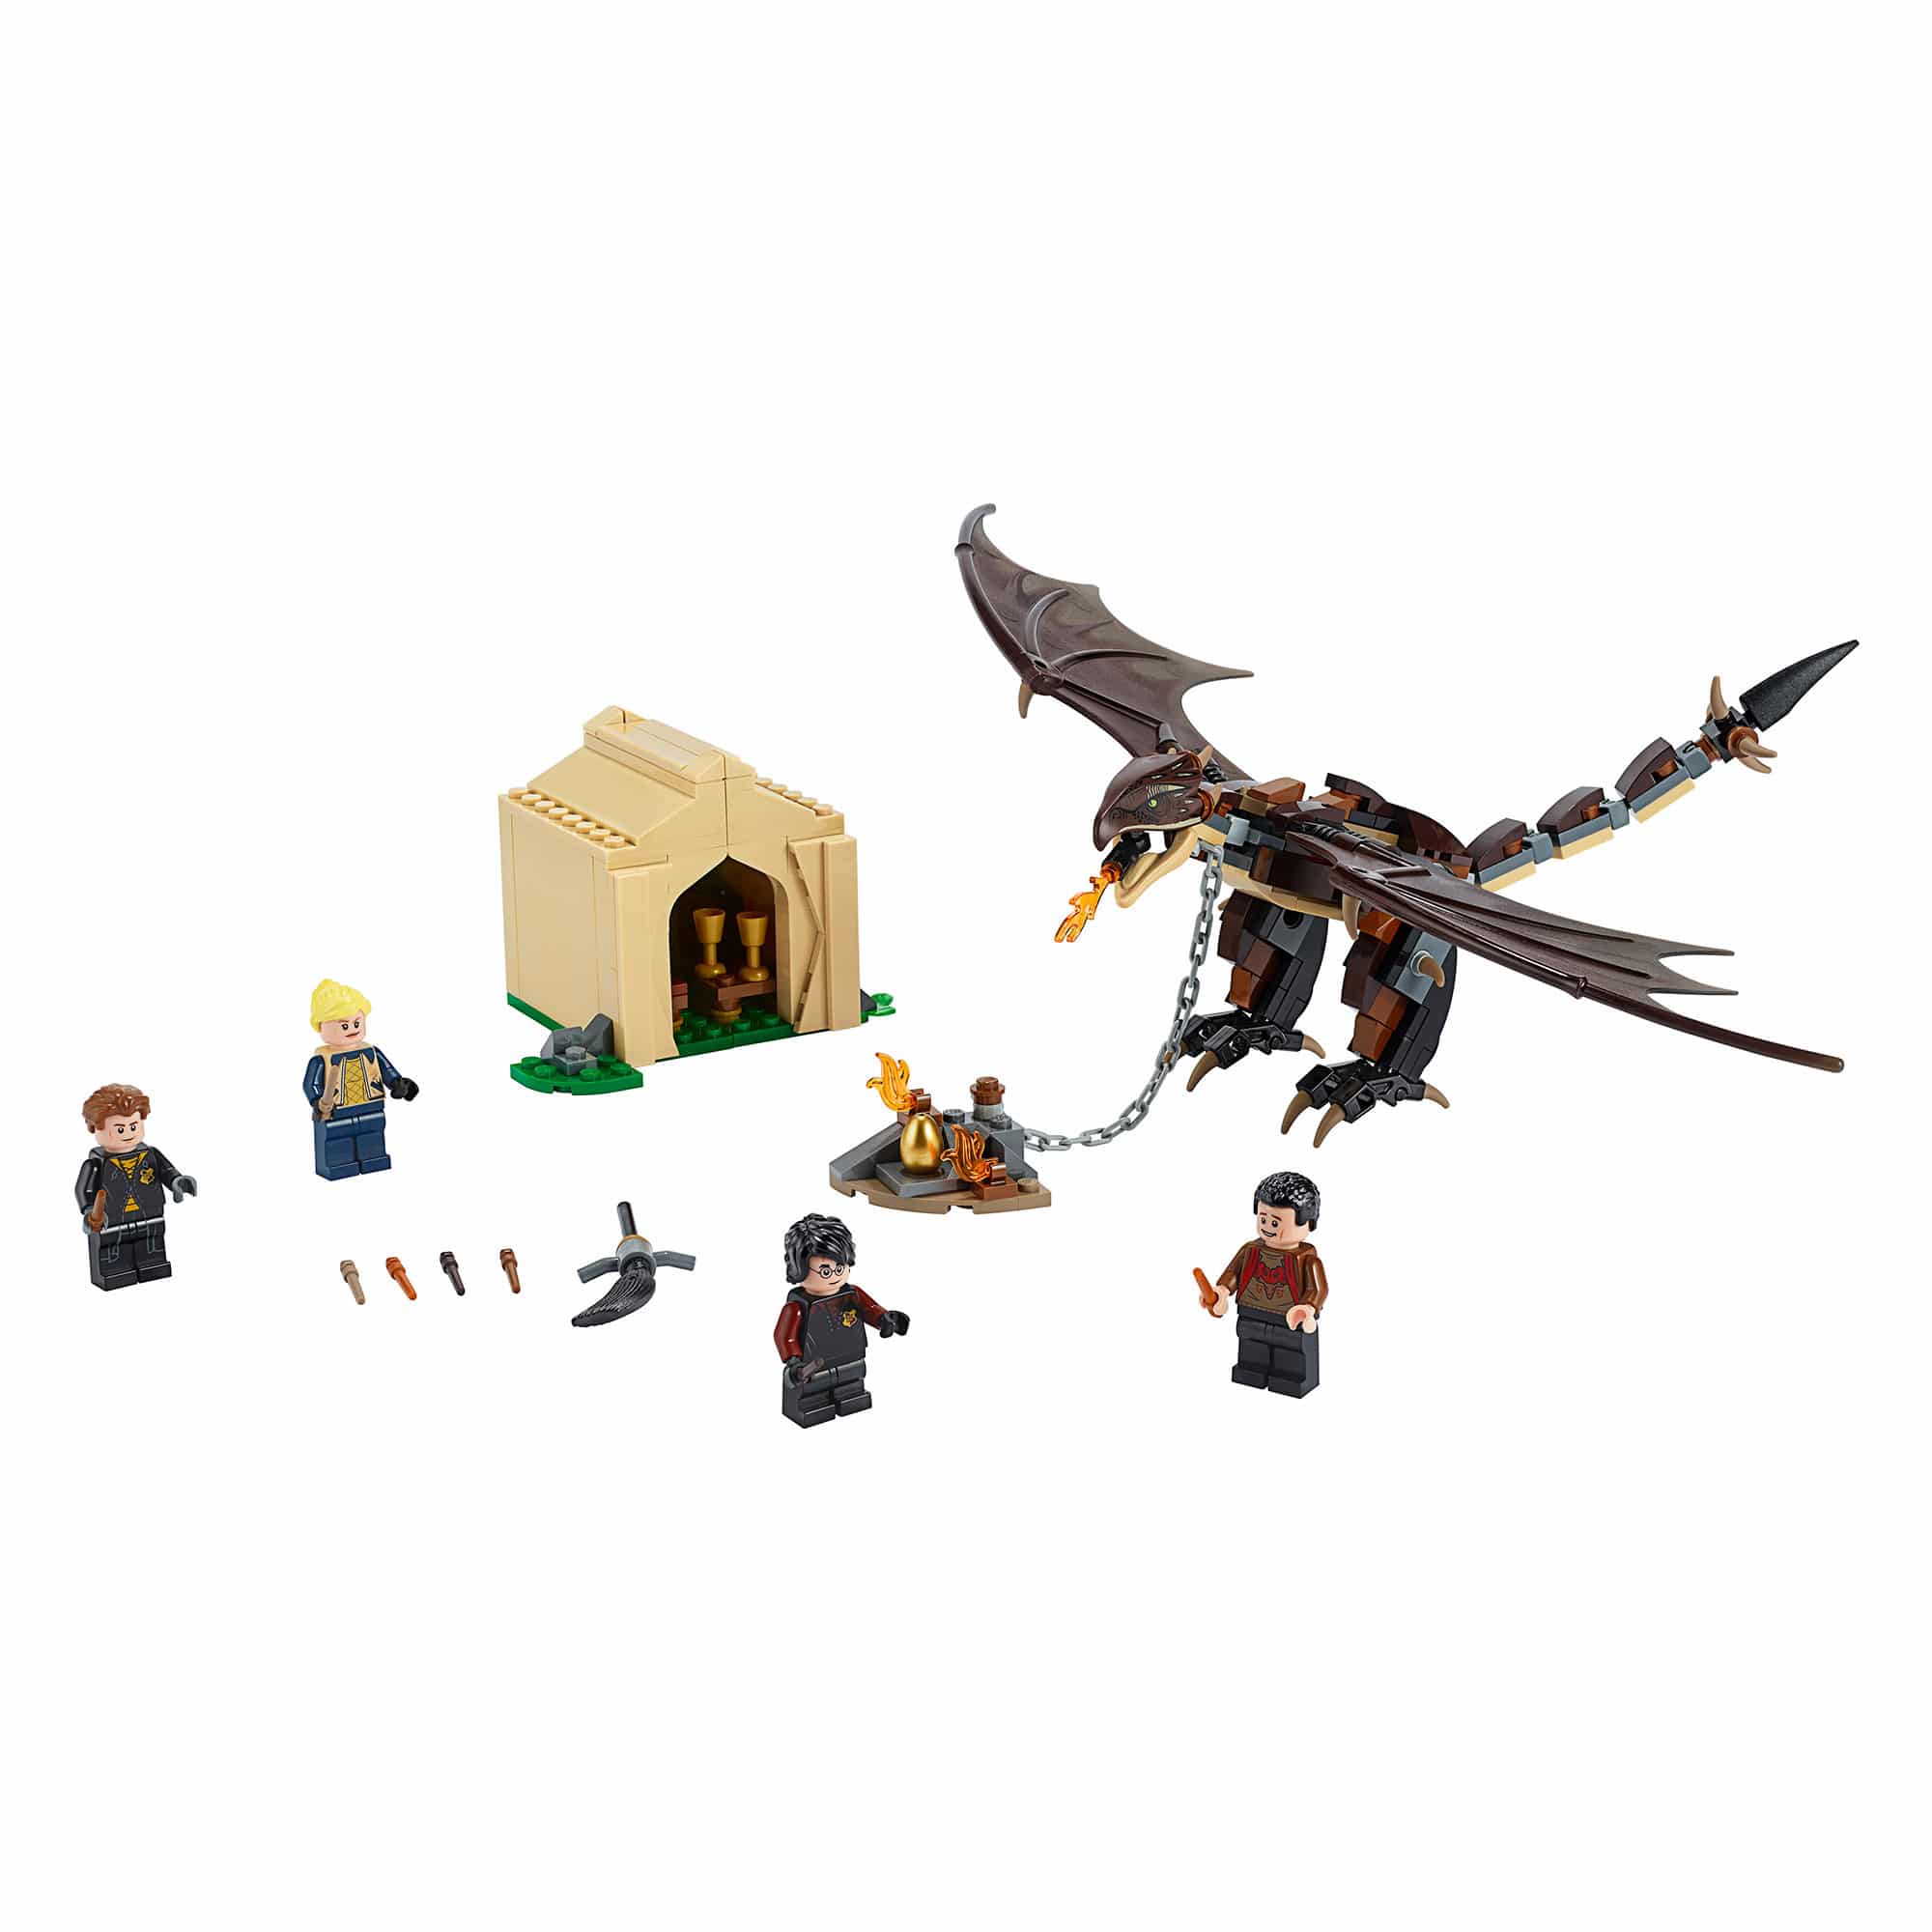 LEGO - Harry Potter - 75946 Hungarian Horntail Triwizard Challenge